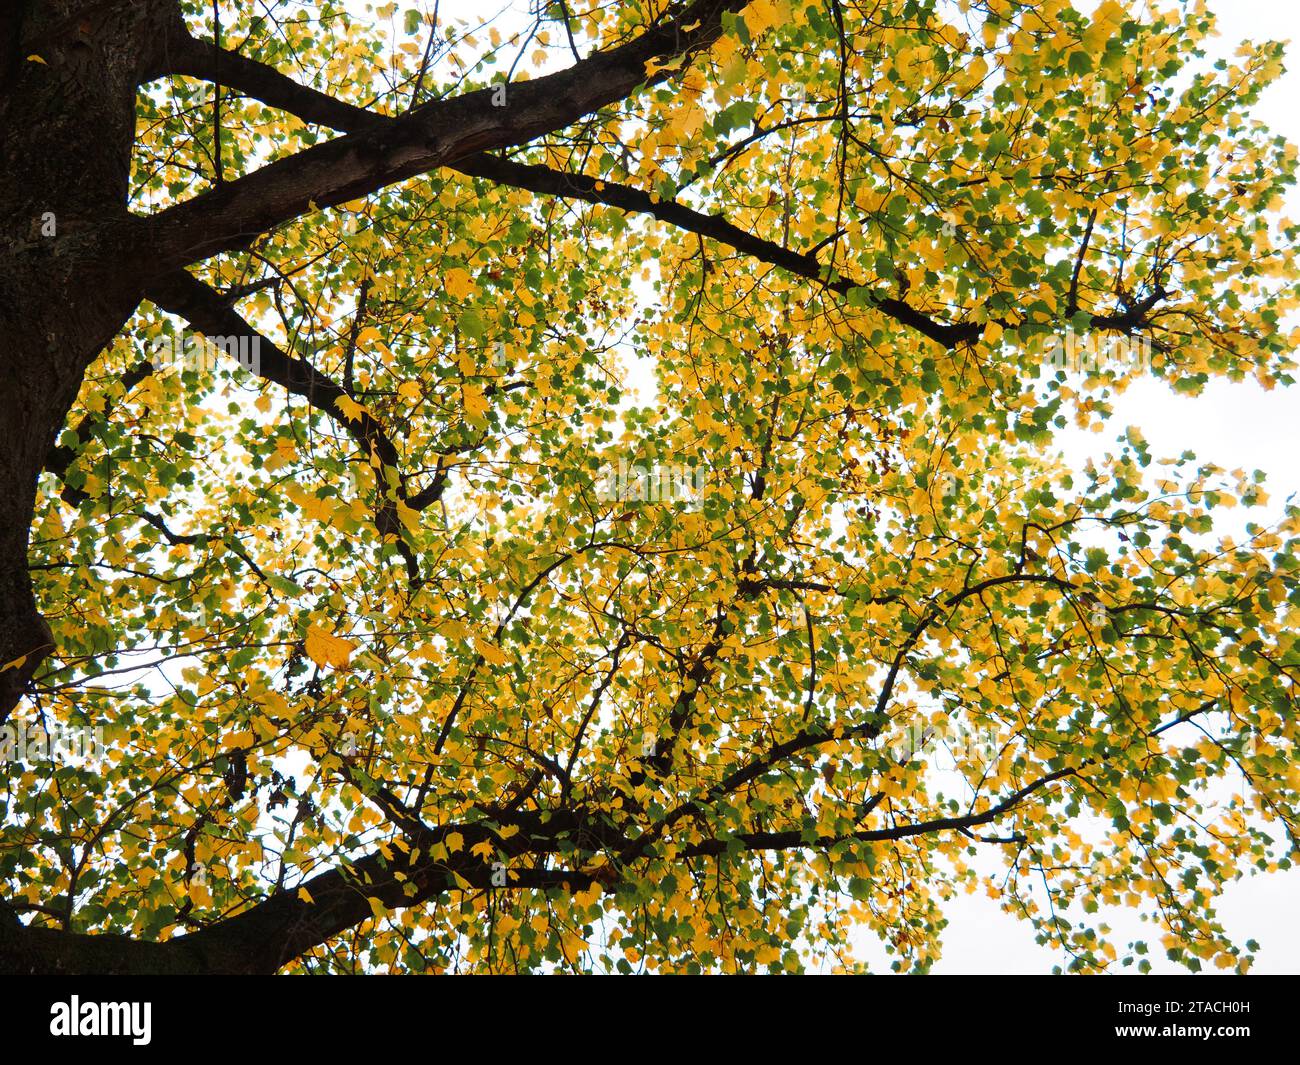 Uprisen angle to autumn tree top, leave color changing from green to yellow. Stock Photo